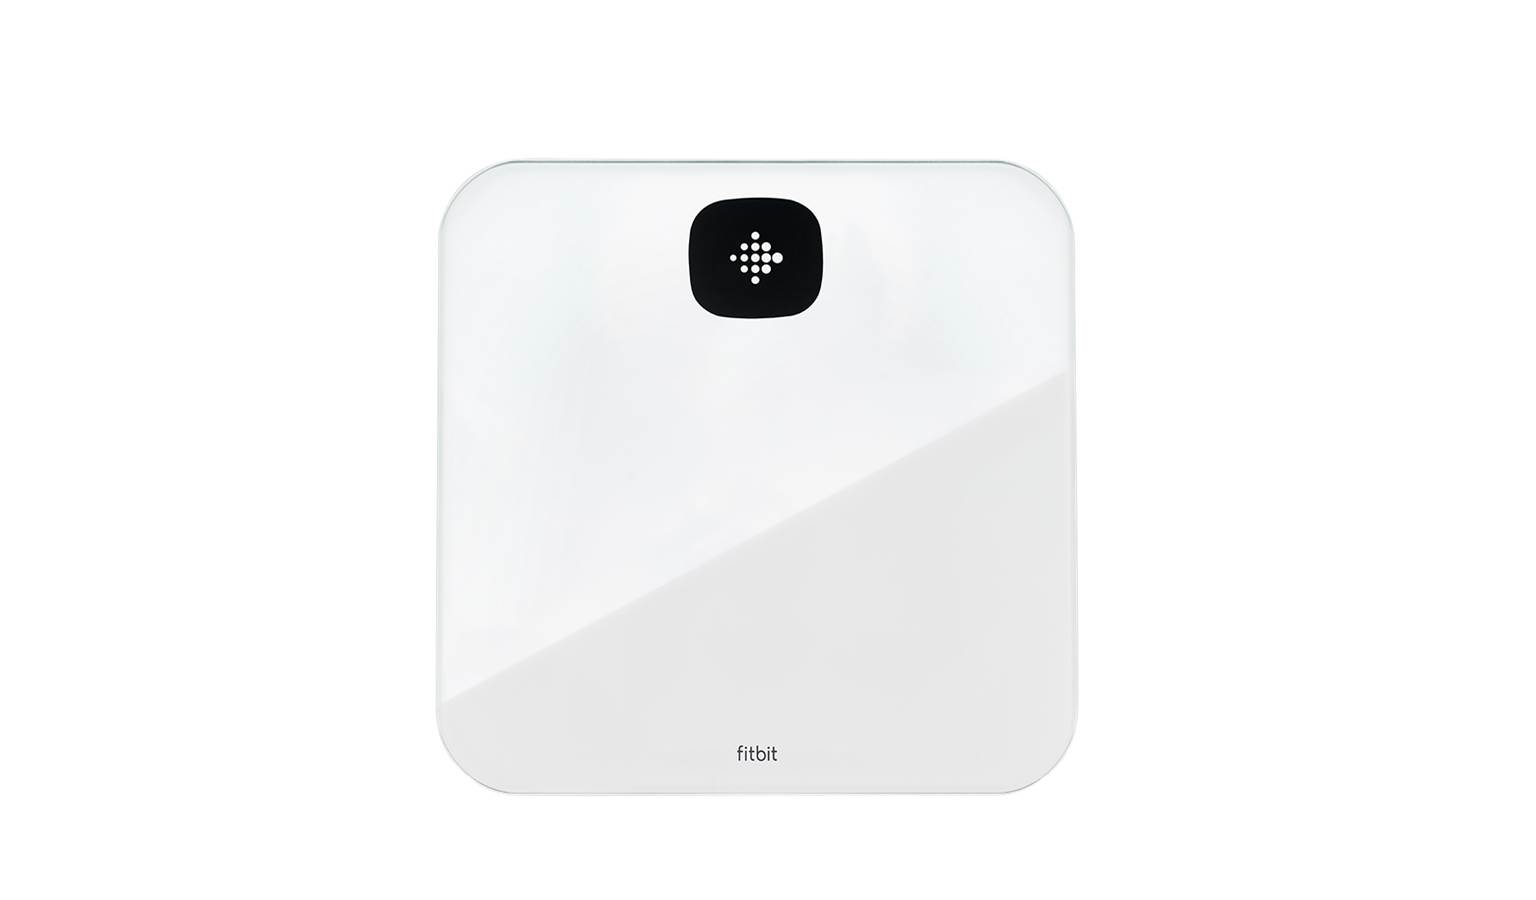 fitbit aria air smart scale stores